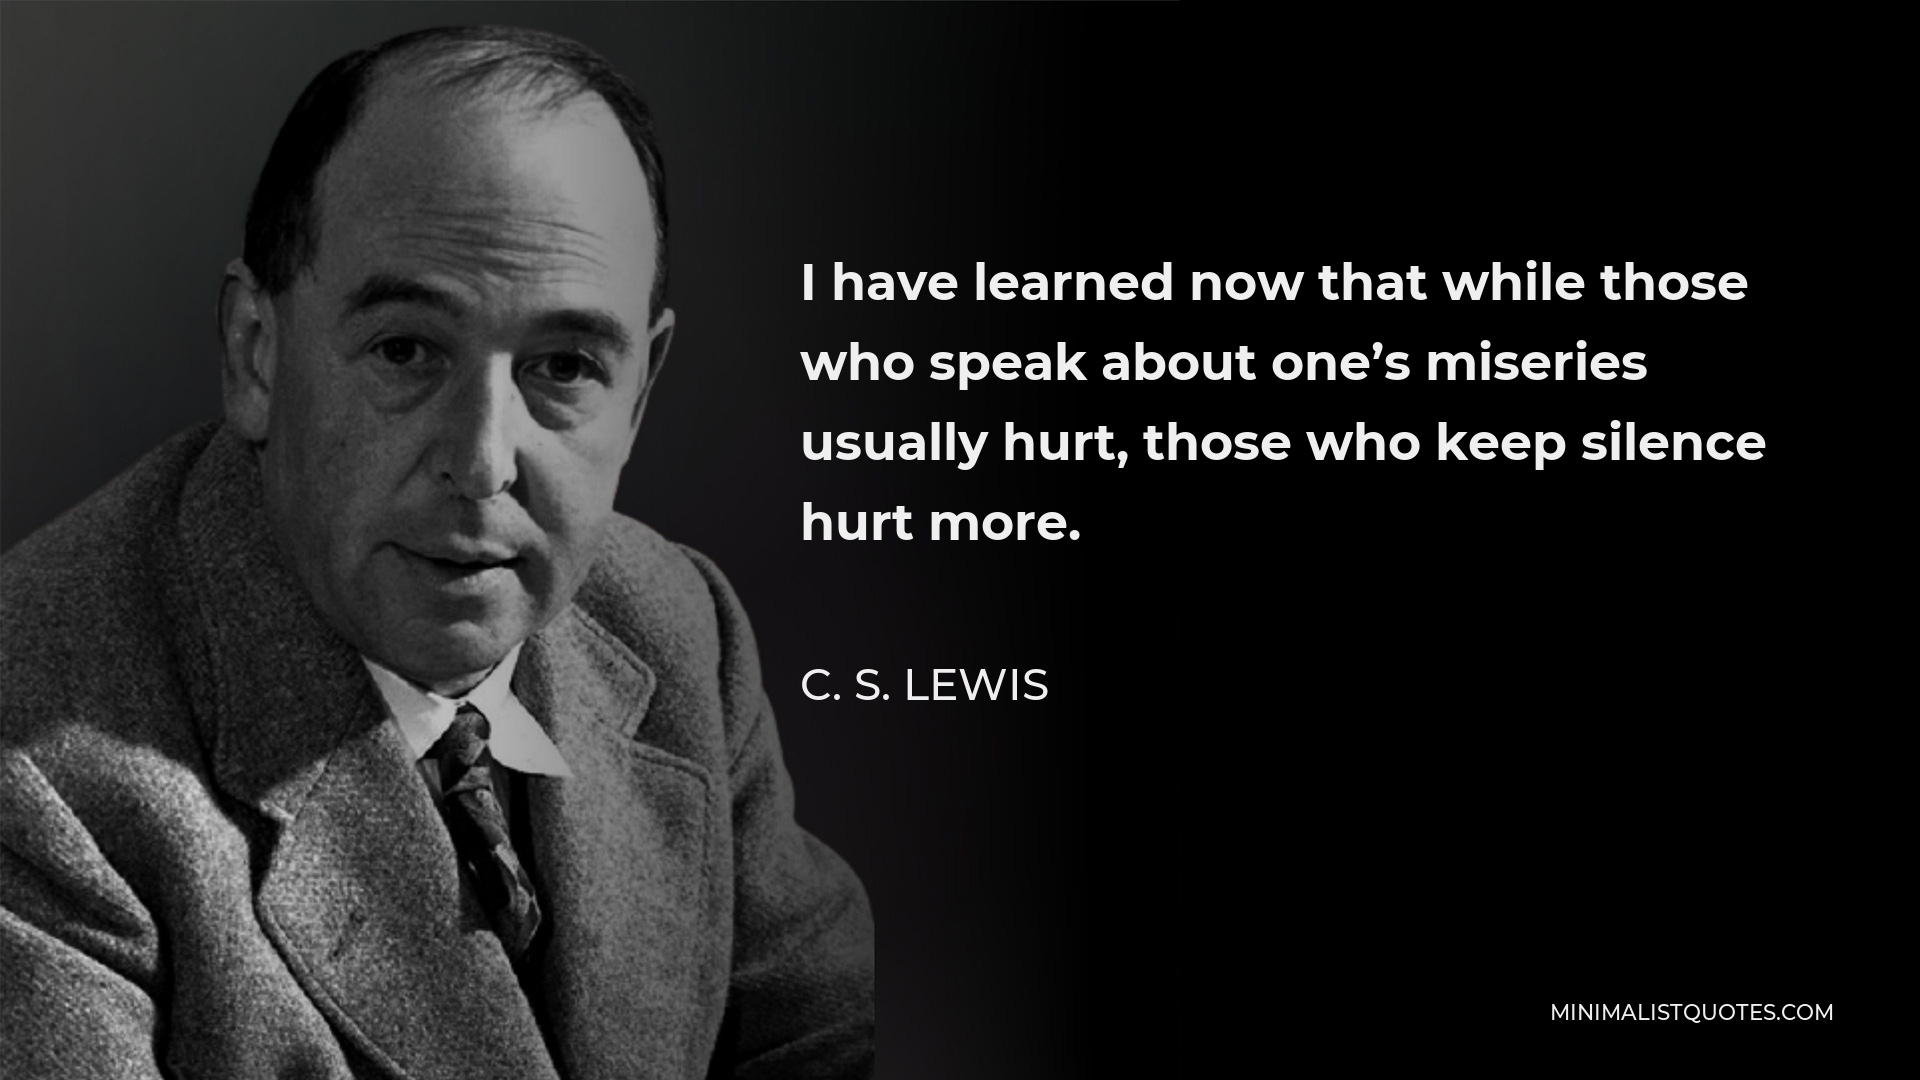 C. S. Lewis Quote - I have learned now that while those who speak about one’s miseries usually hurt, those who keep silence hurt more.